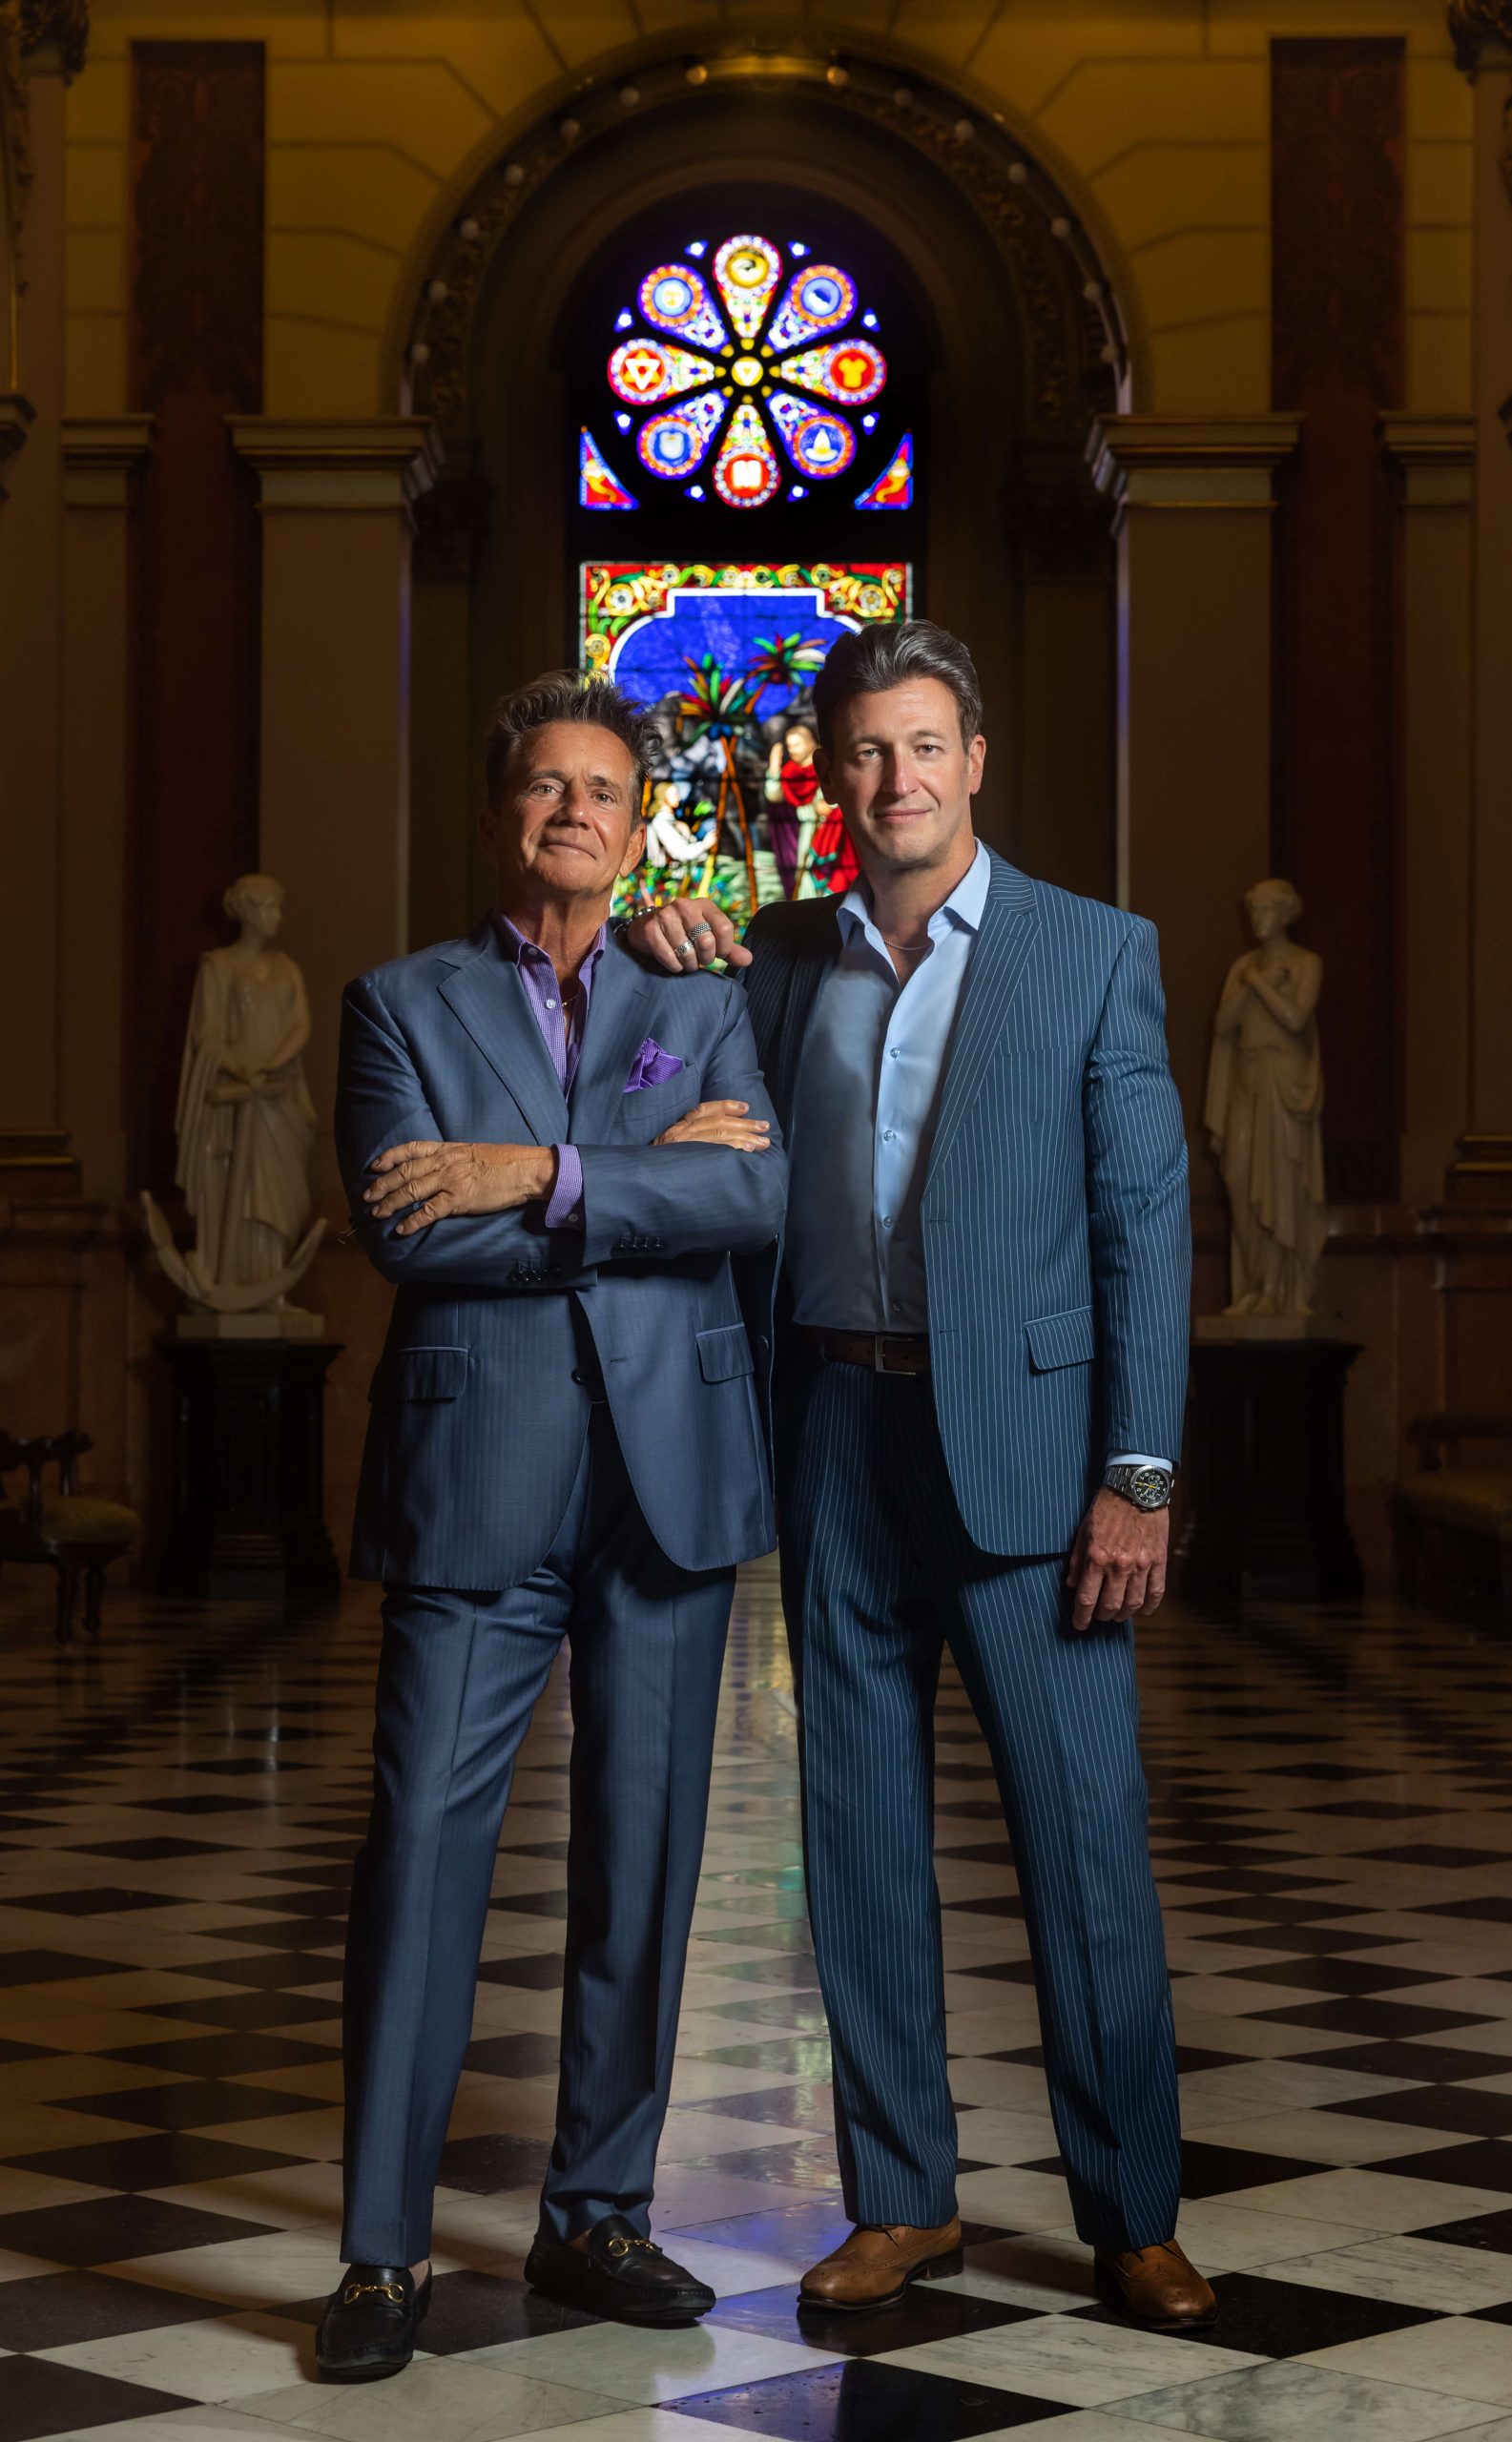 two men in suits standing in masonic temple with stained glass window